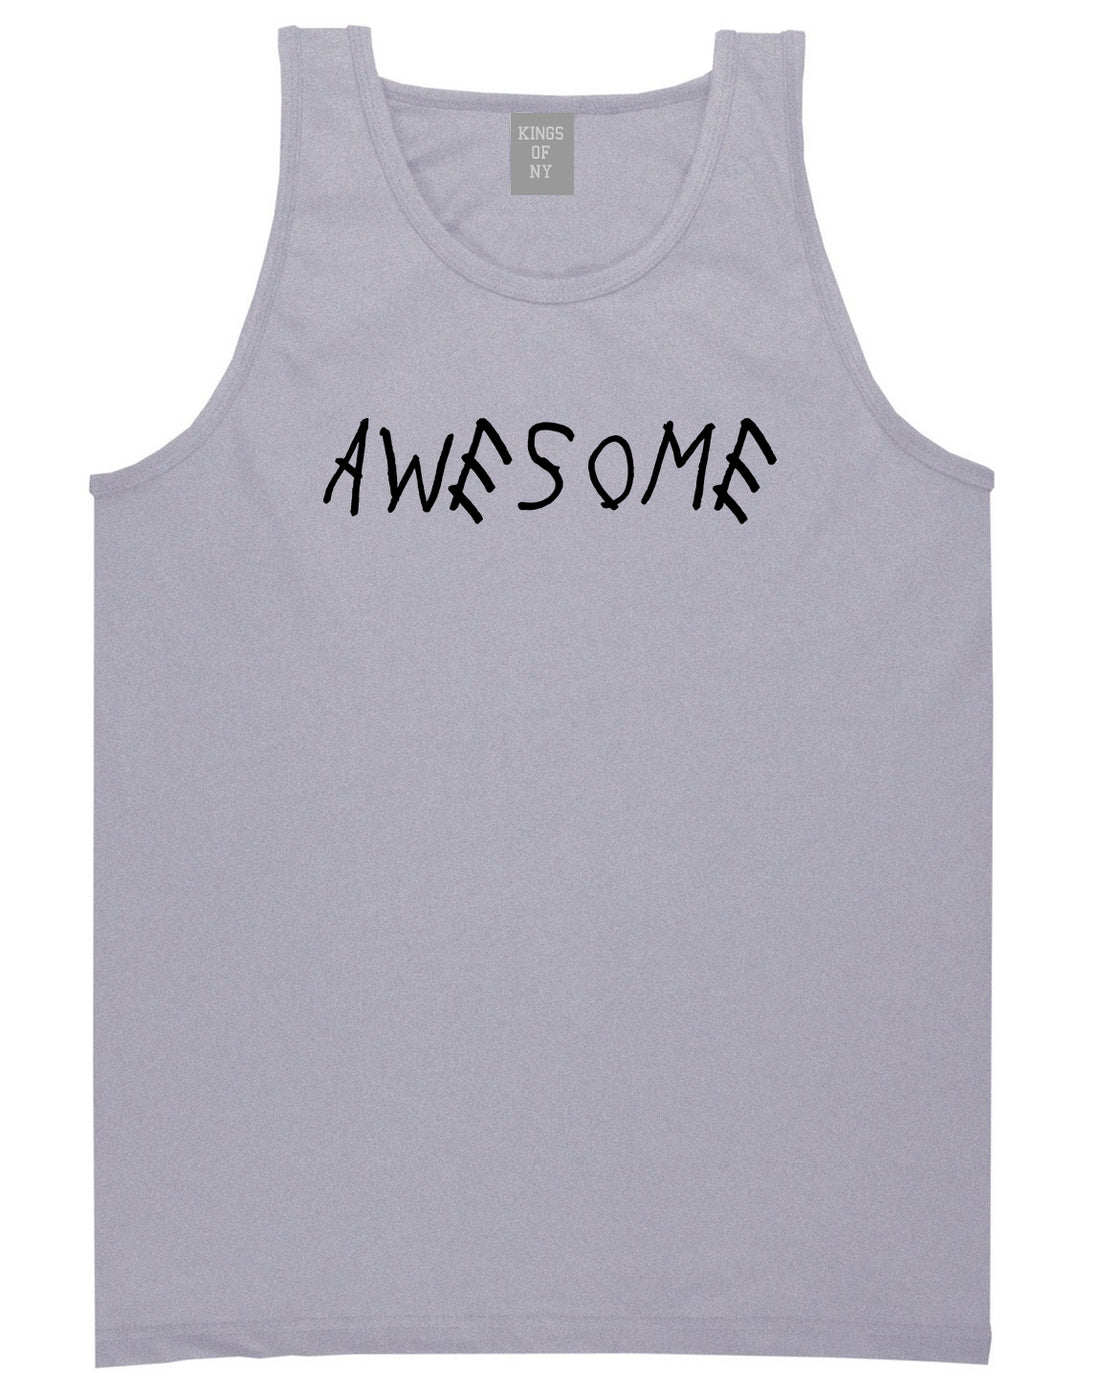 Awesome Grey Tank Top Shirt by Kings Of NY